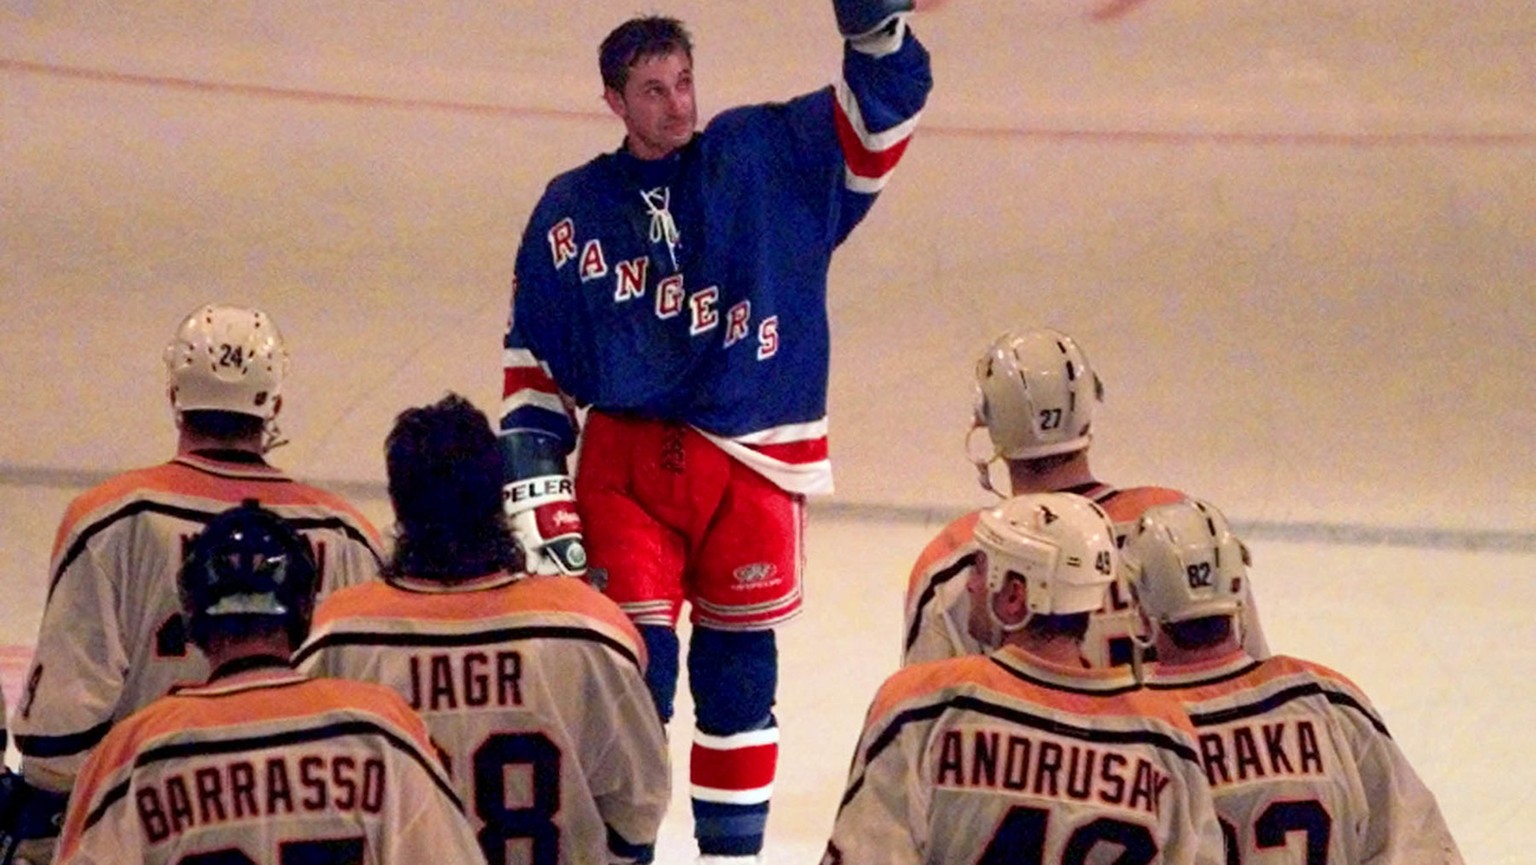 New York Rangers Wayne Gretzky (99) waves to the crowd as he skates towards the Pittsburgh Penguins after playing his last National Hockey Leaque hockey game at New York&#039;s Madison Square Garden S ...